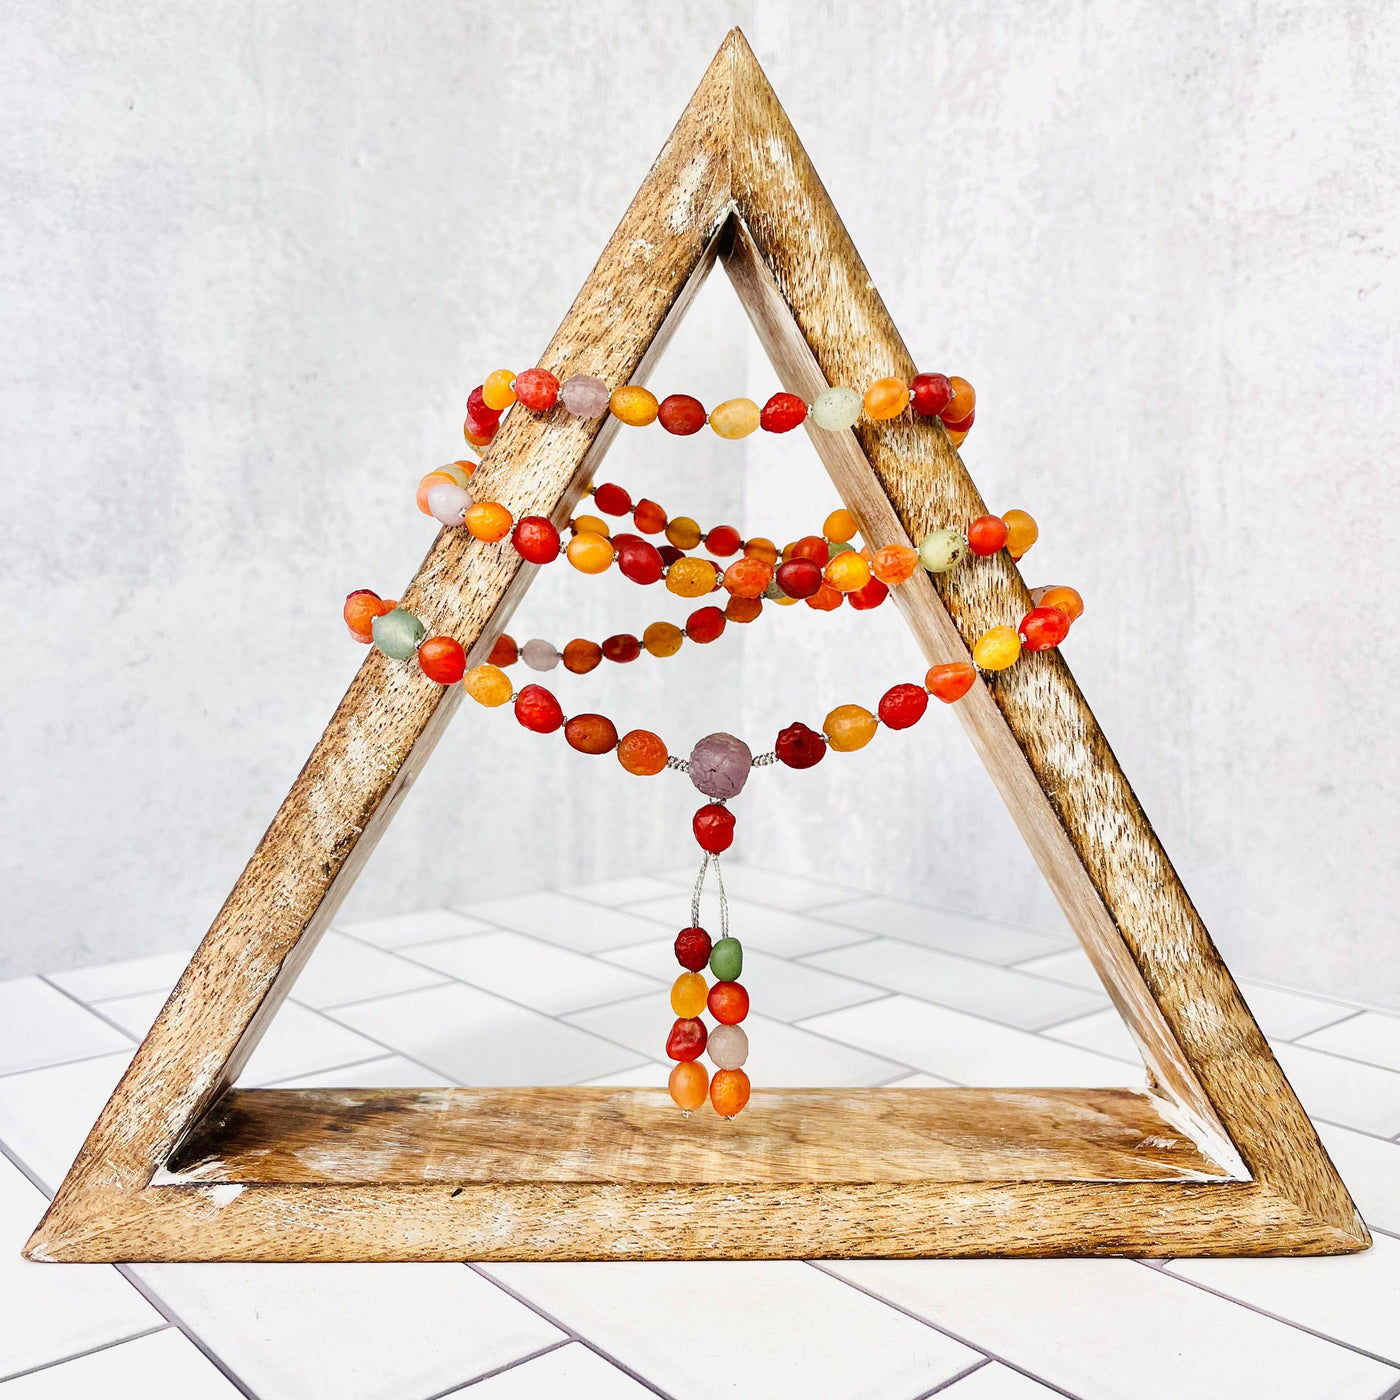 Gobi Desert Agate Mala Bead Necklace displayed on a wooden triangle, wrapped around and hanging down center. 